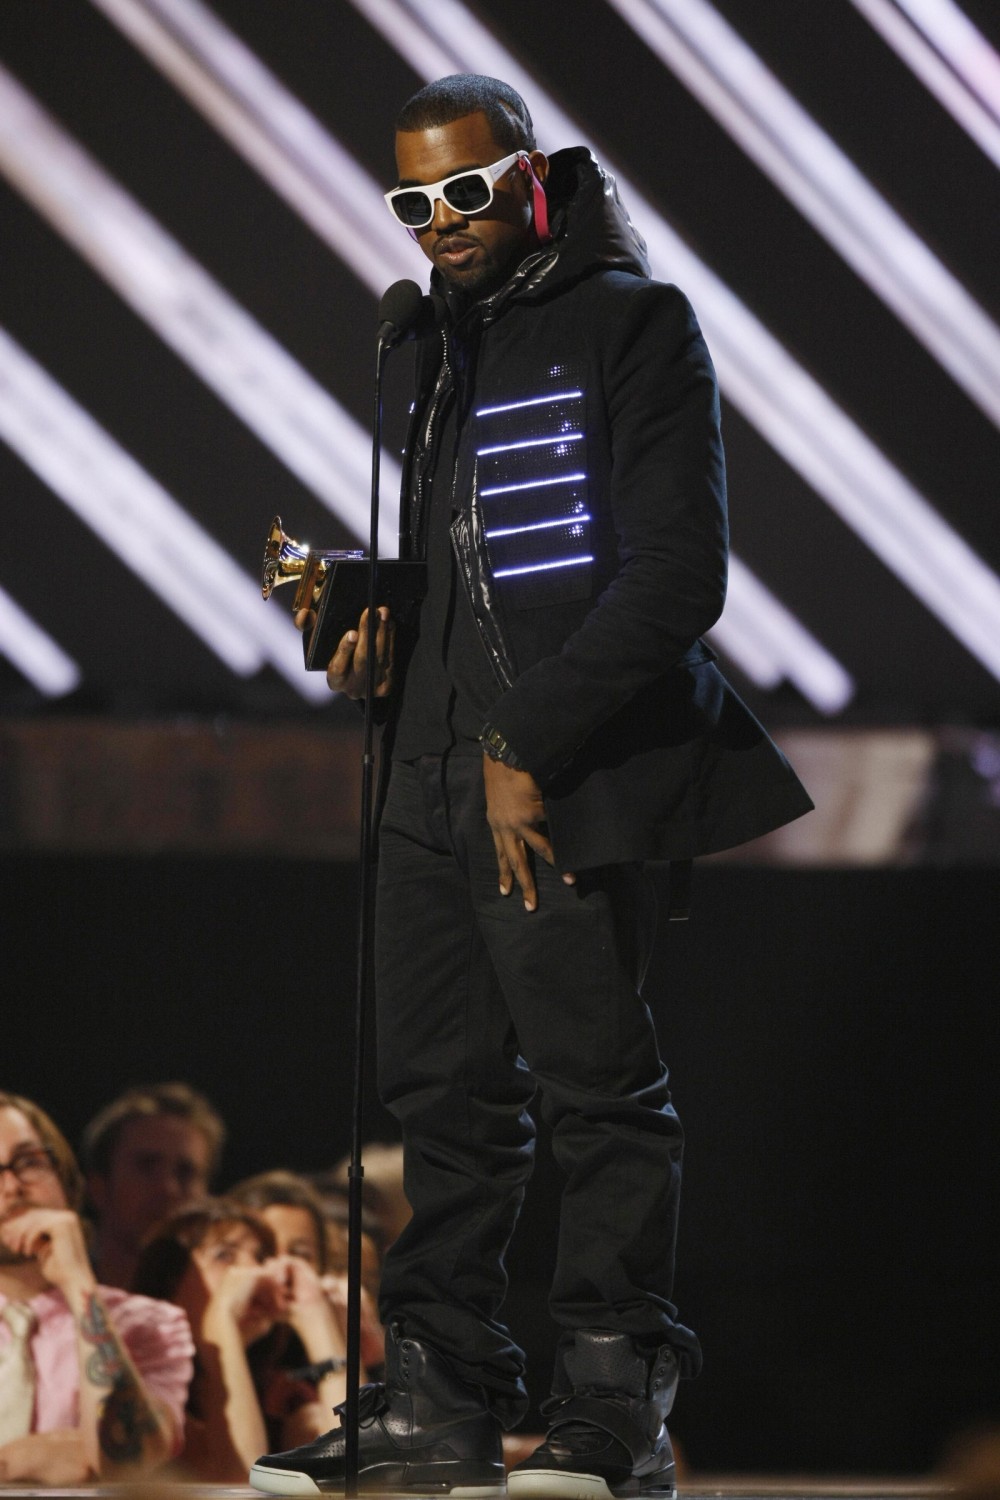 Kanye West at the 2008 Grammys in his sneakers